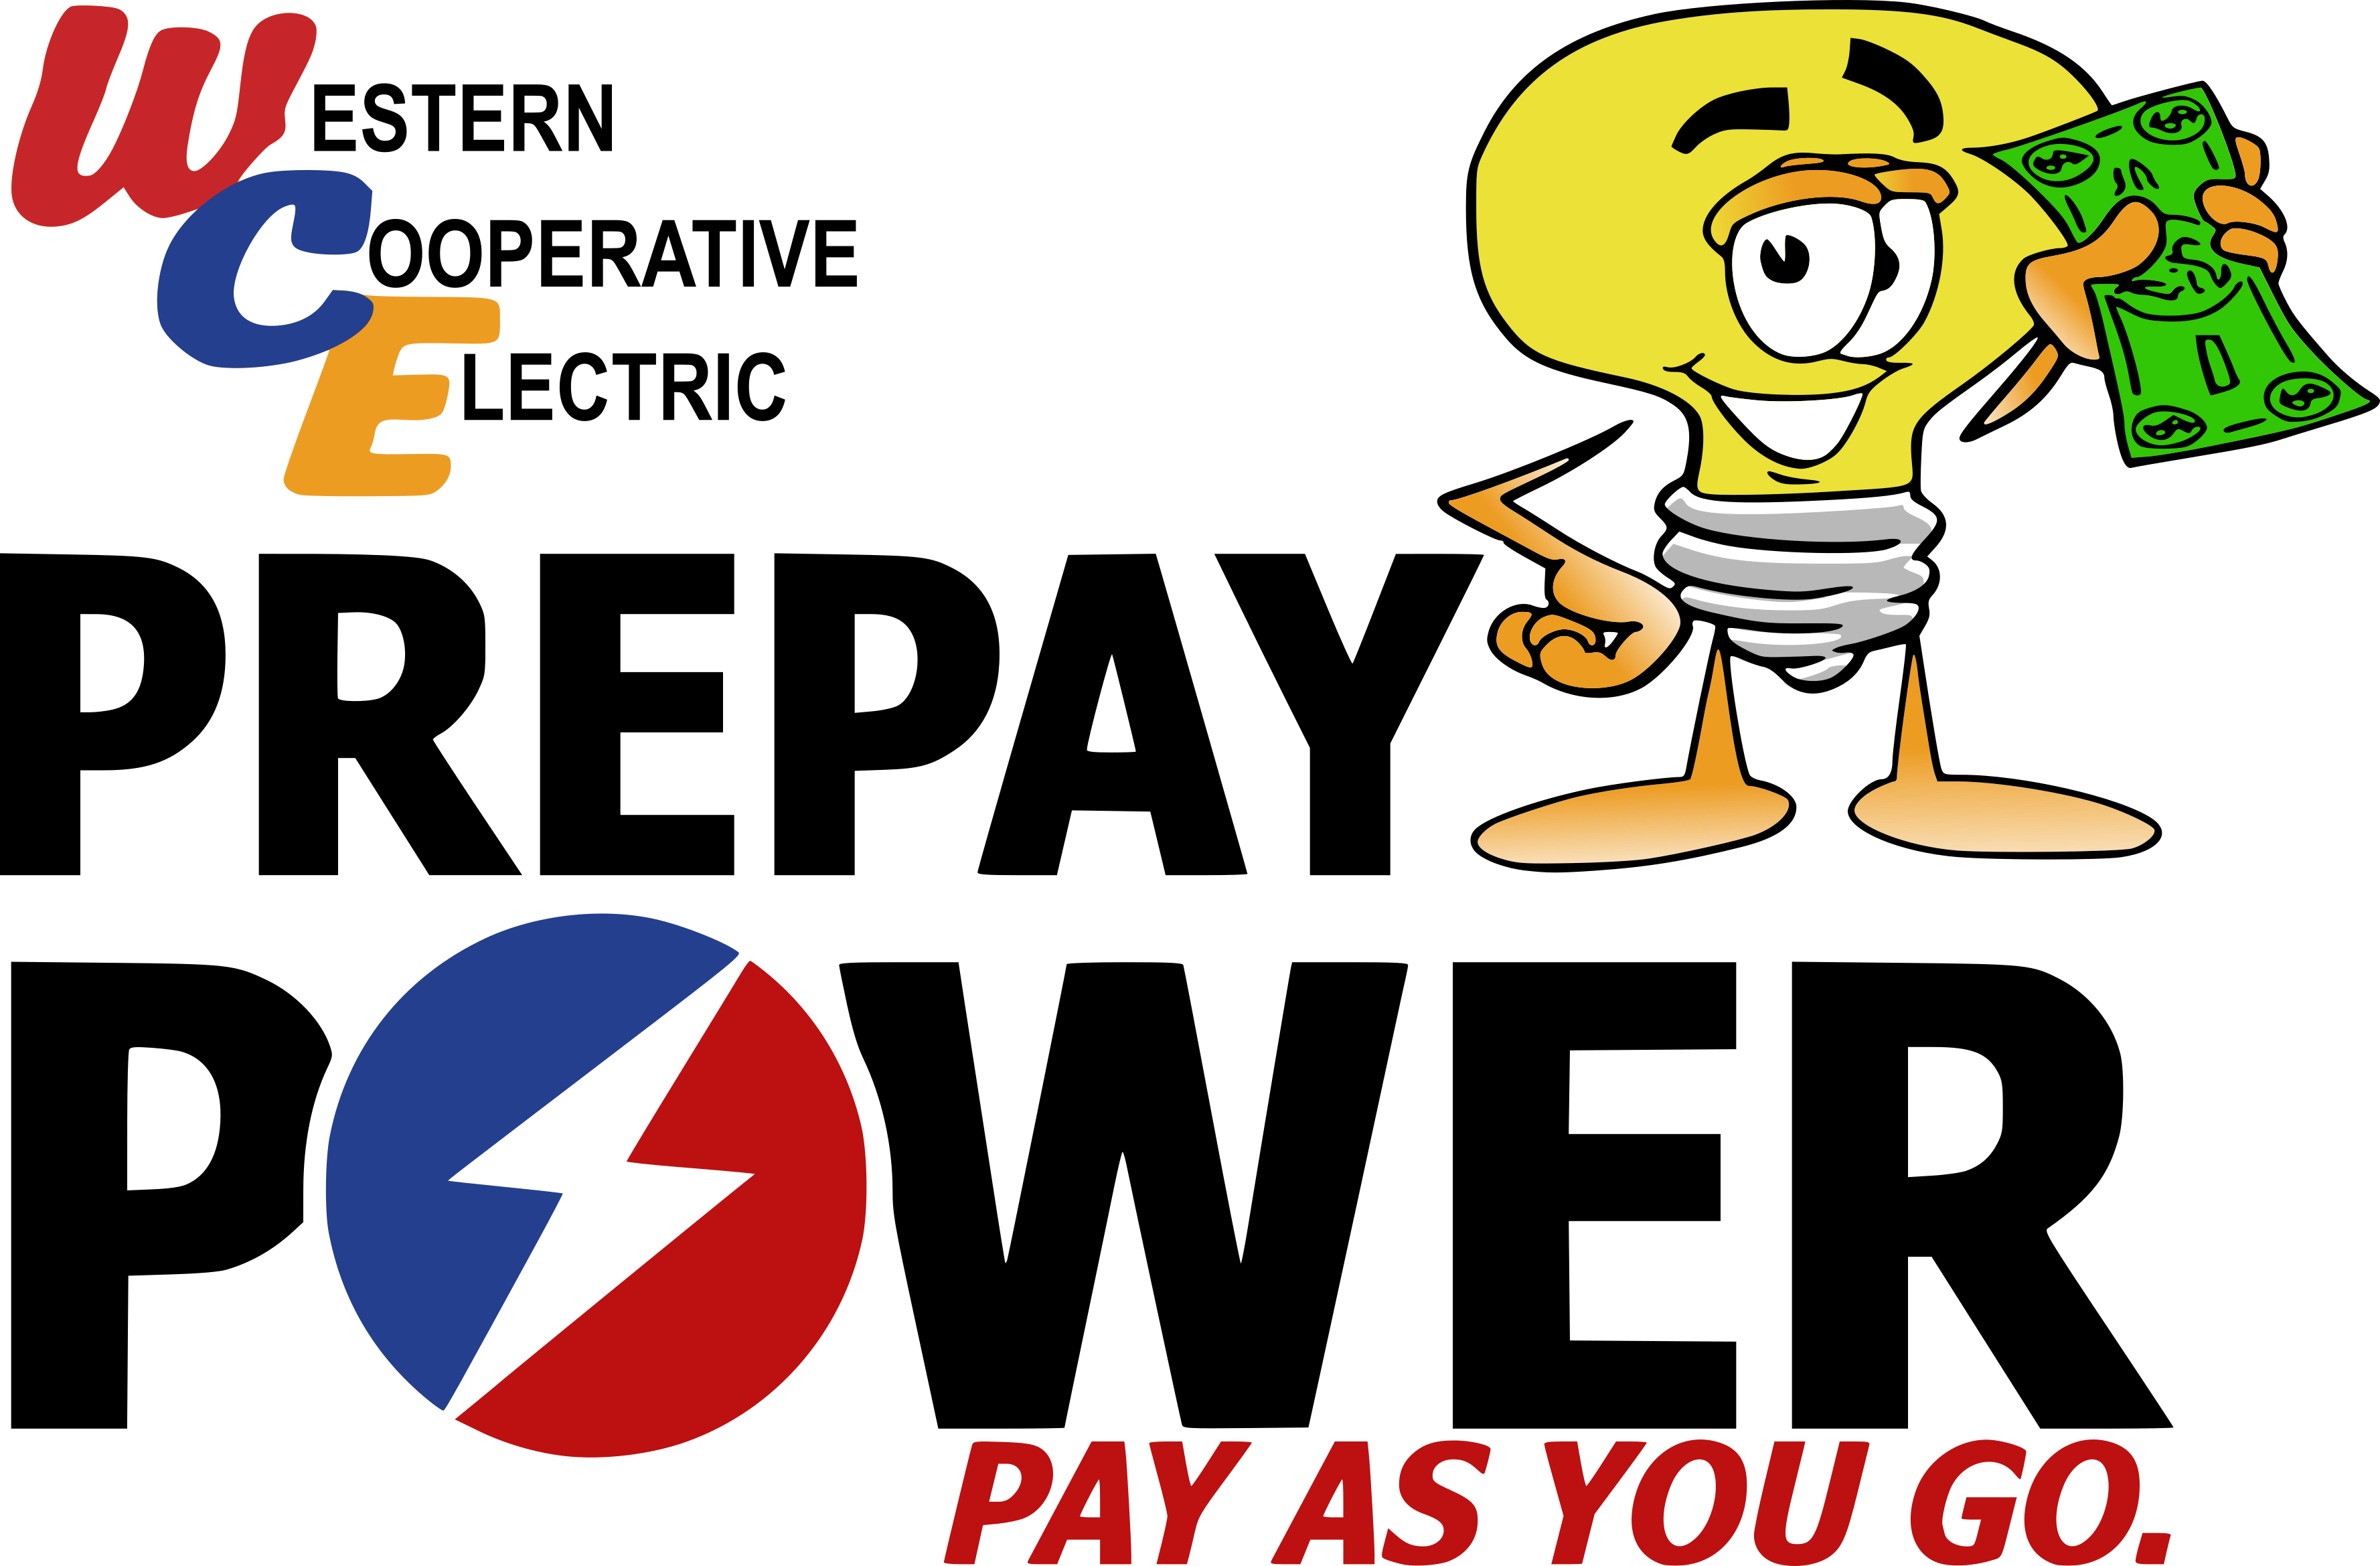 Pay as you go power.